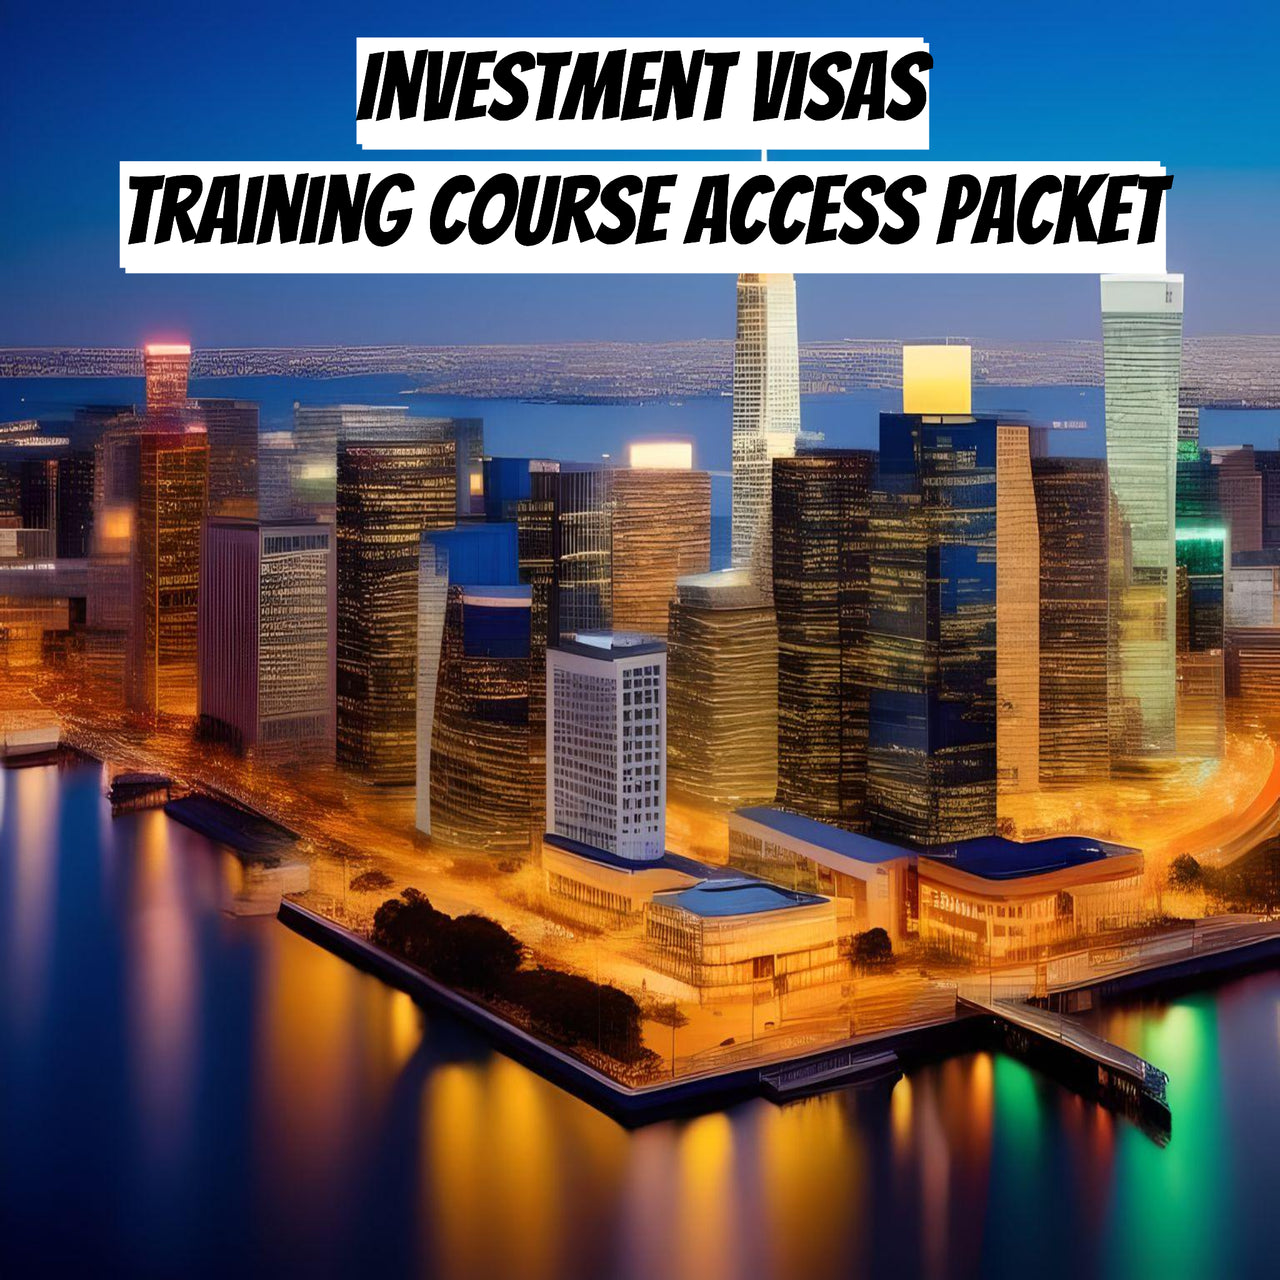 Investment Visas Training Course Access Packet